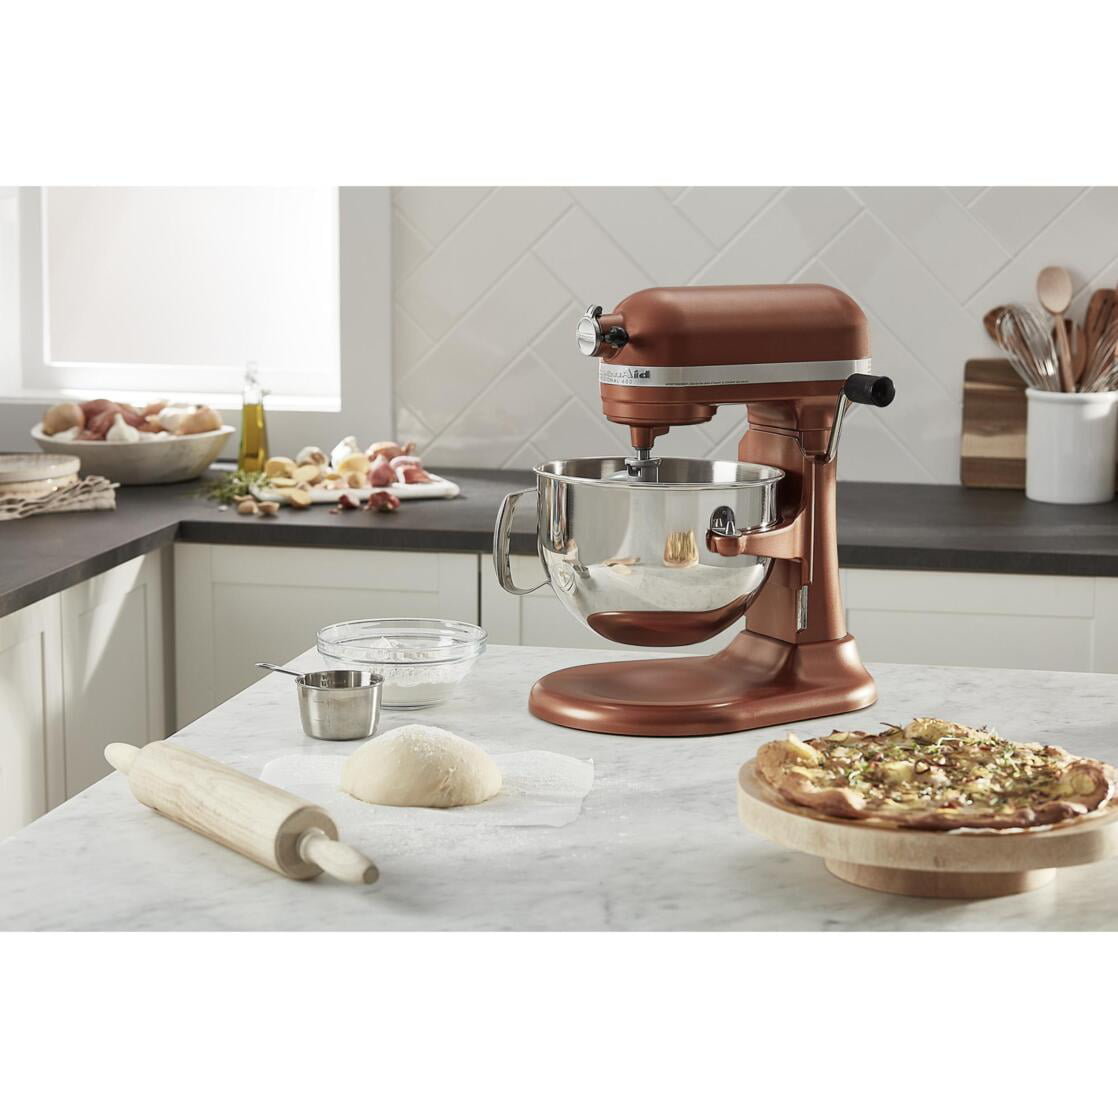 KitchenAid Pro 600 Unboxing and Review 